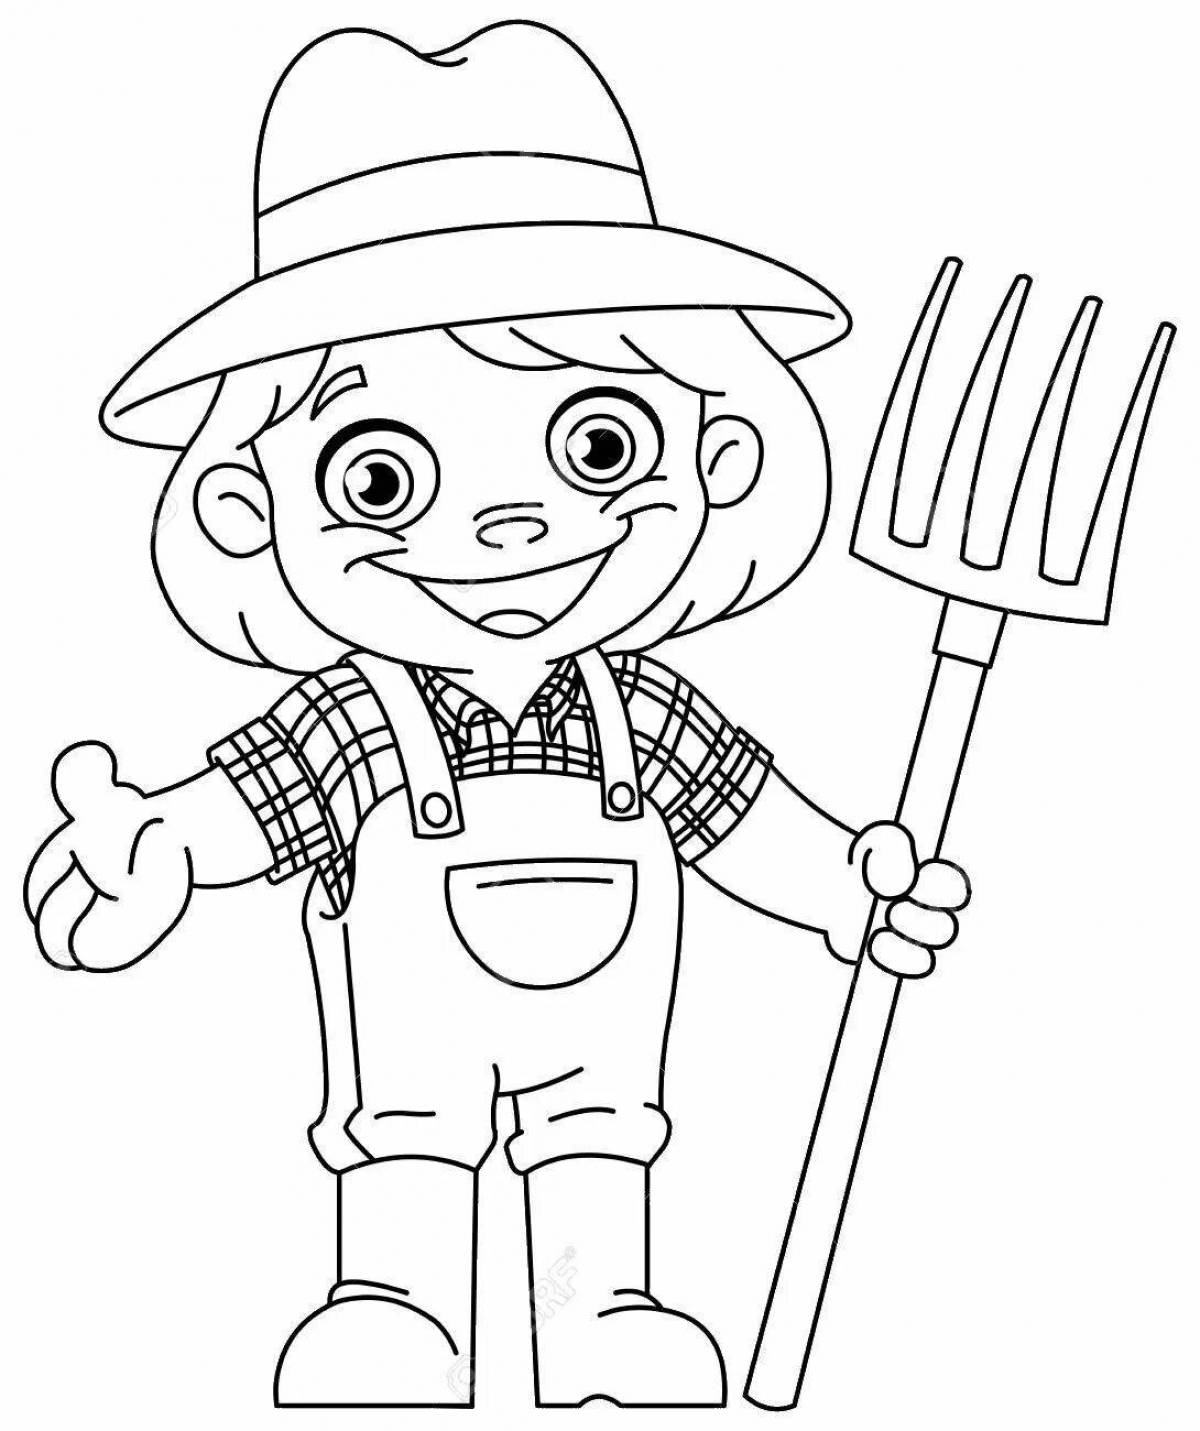 Gardener involvement coloring page